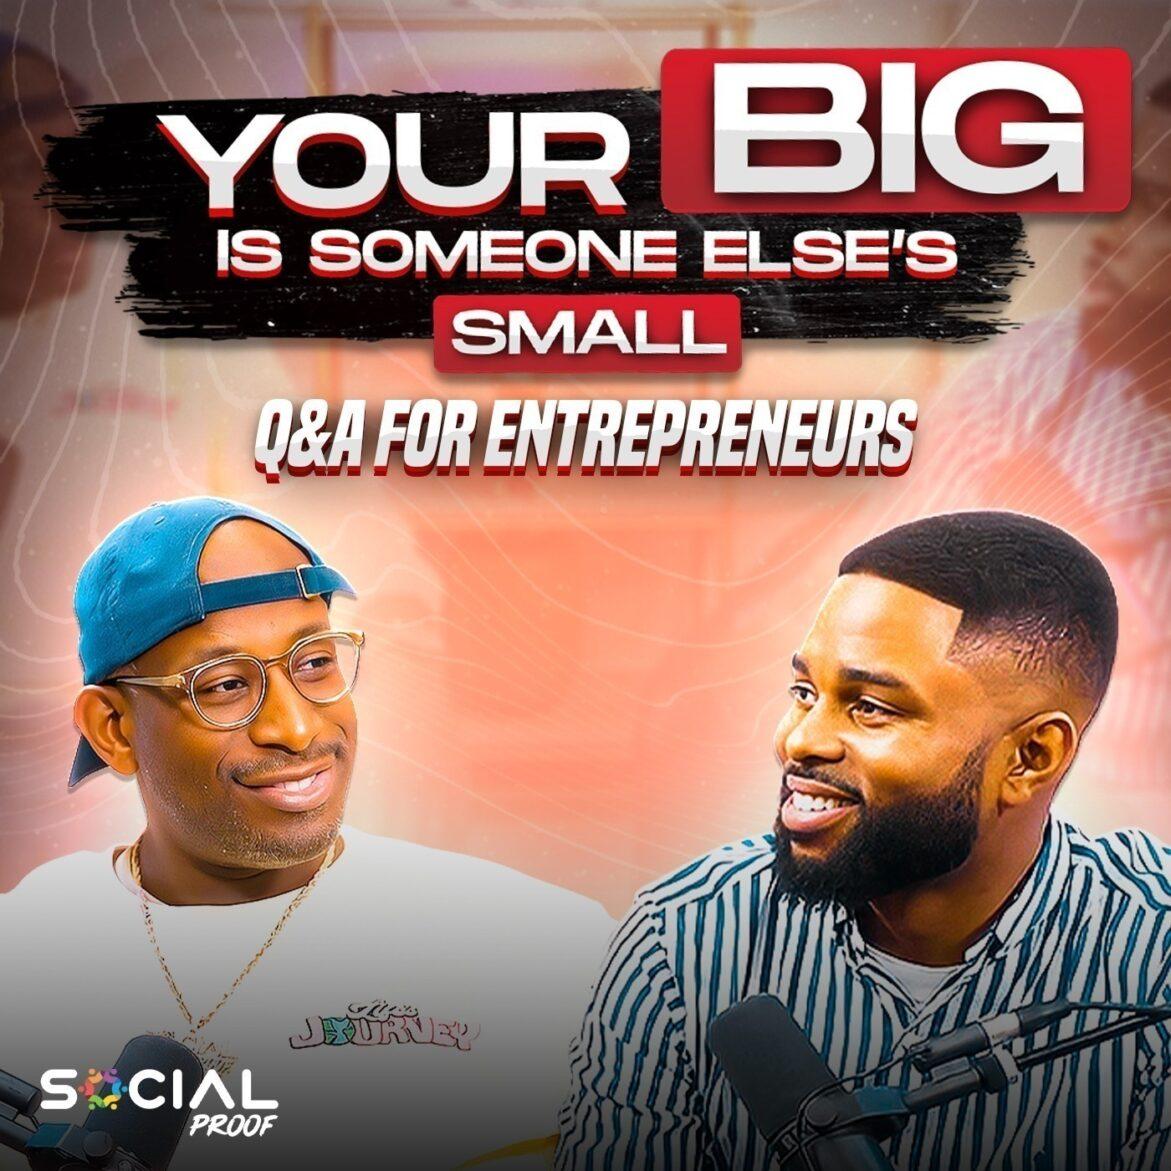 Black Podcasting - Being Around Bigger Makes Your Big Small (ENTREPRENEUR'S Q&A w/Terrence)